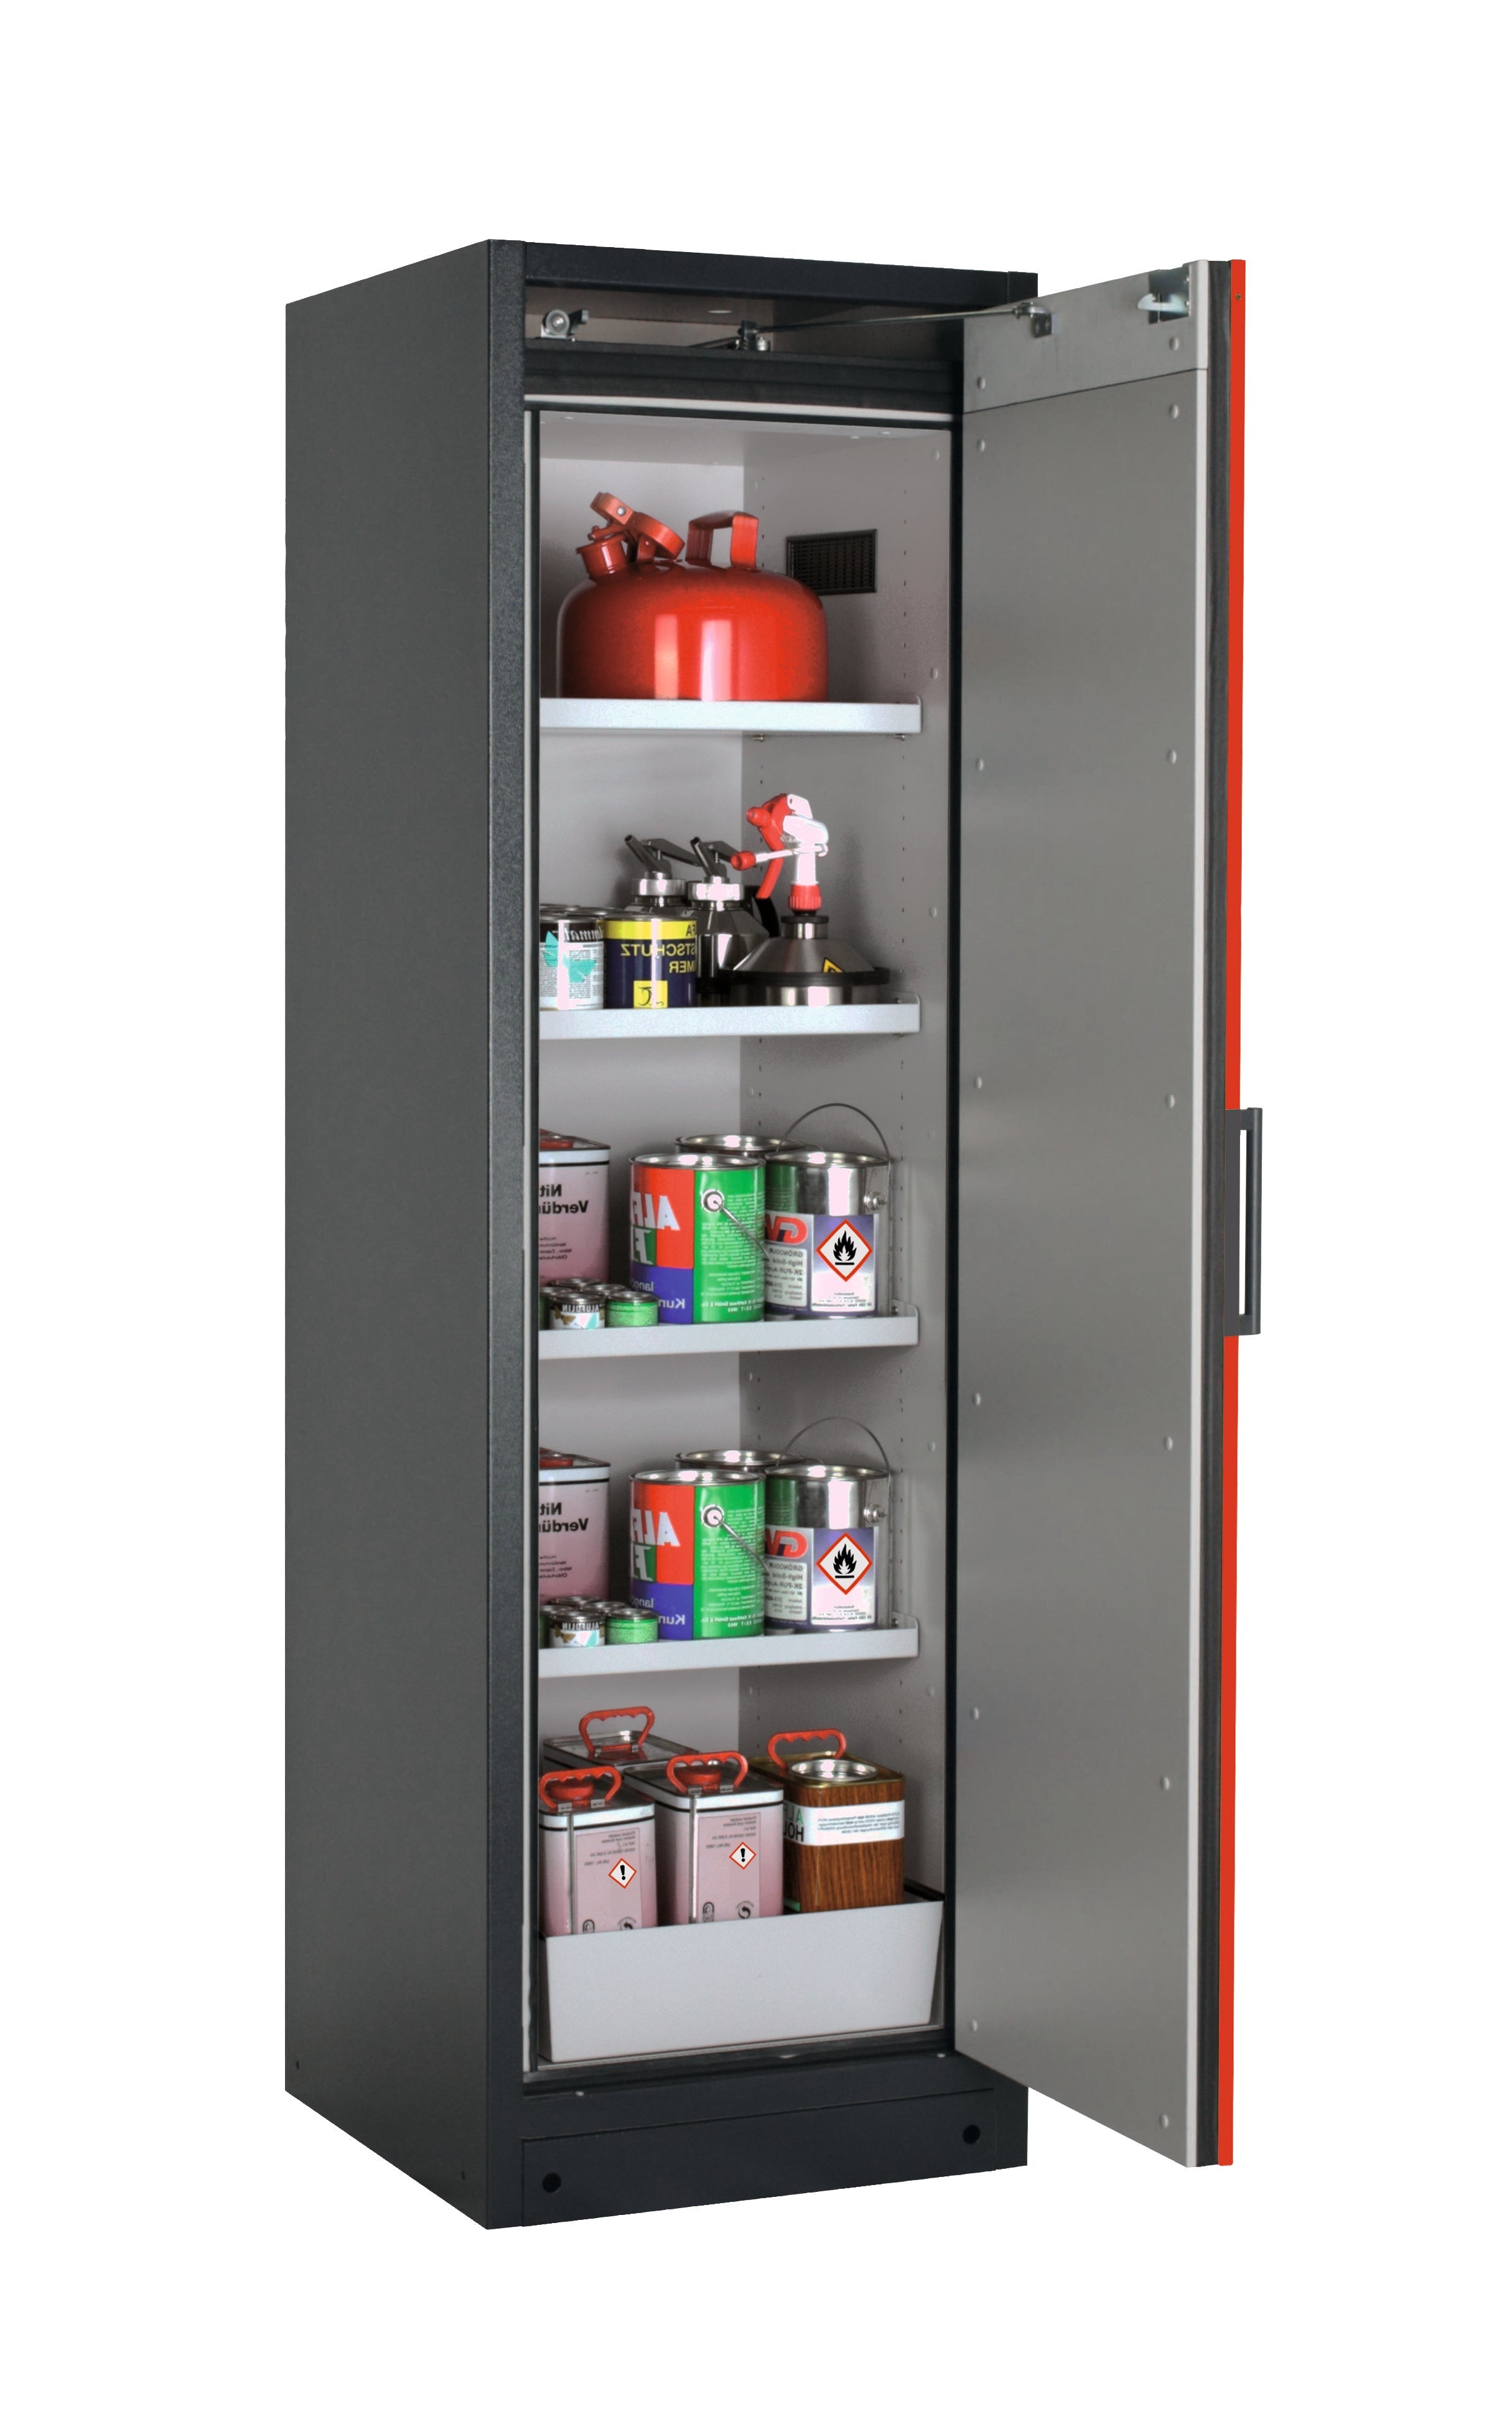 Type 90 safety storage cabinet Q-CLASSIC-90 model Q90.195.060.R in traffic red RAL 3020 with 4x shelf standard (sheet steel),